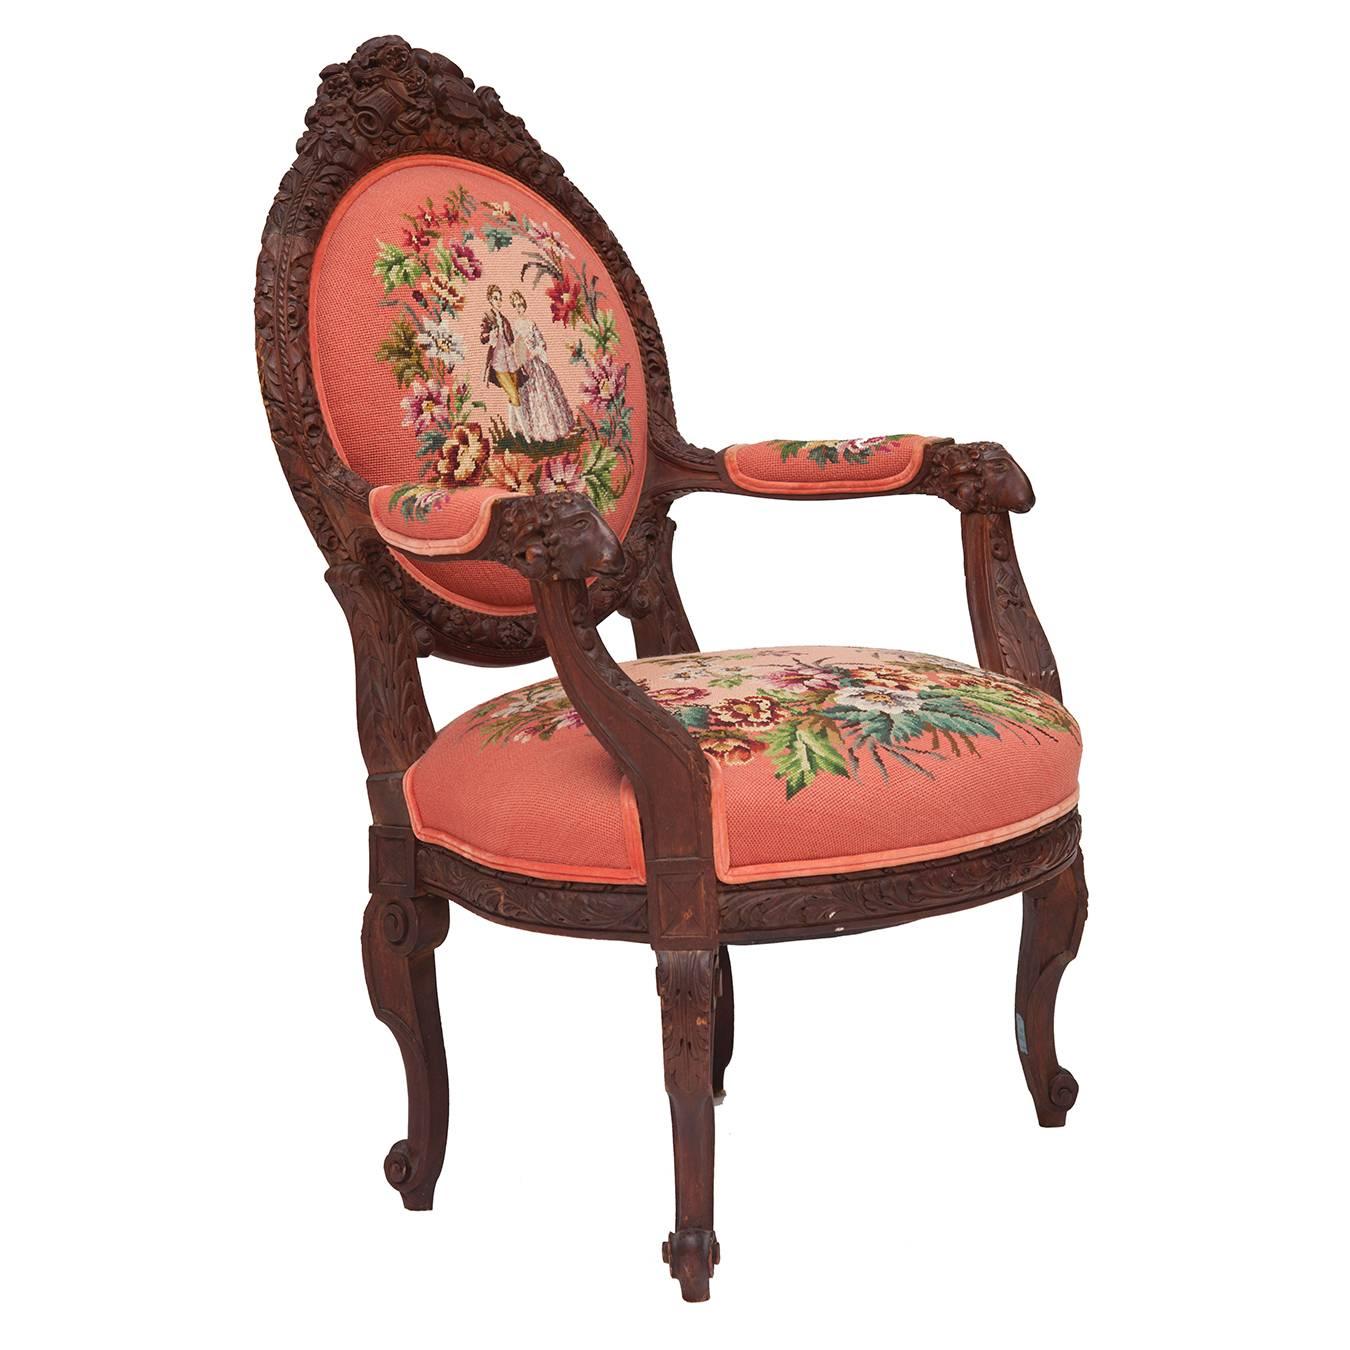 19th century hand-carved French needlepoint Aubusson chair with musical accents. Original Aubusson upholstery.